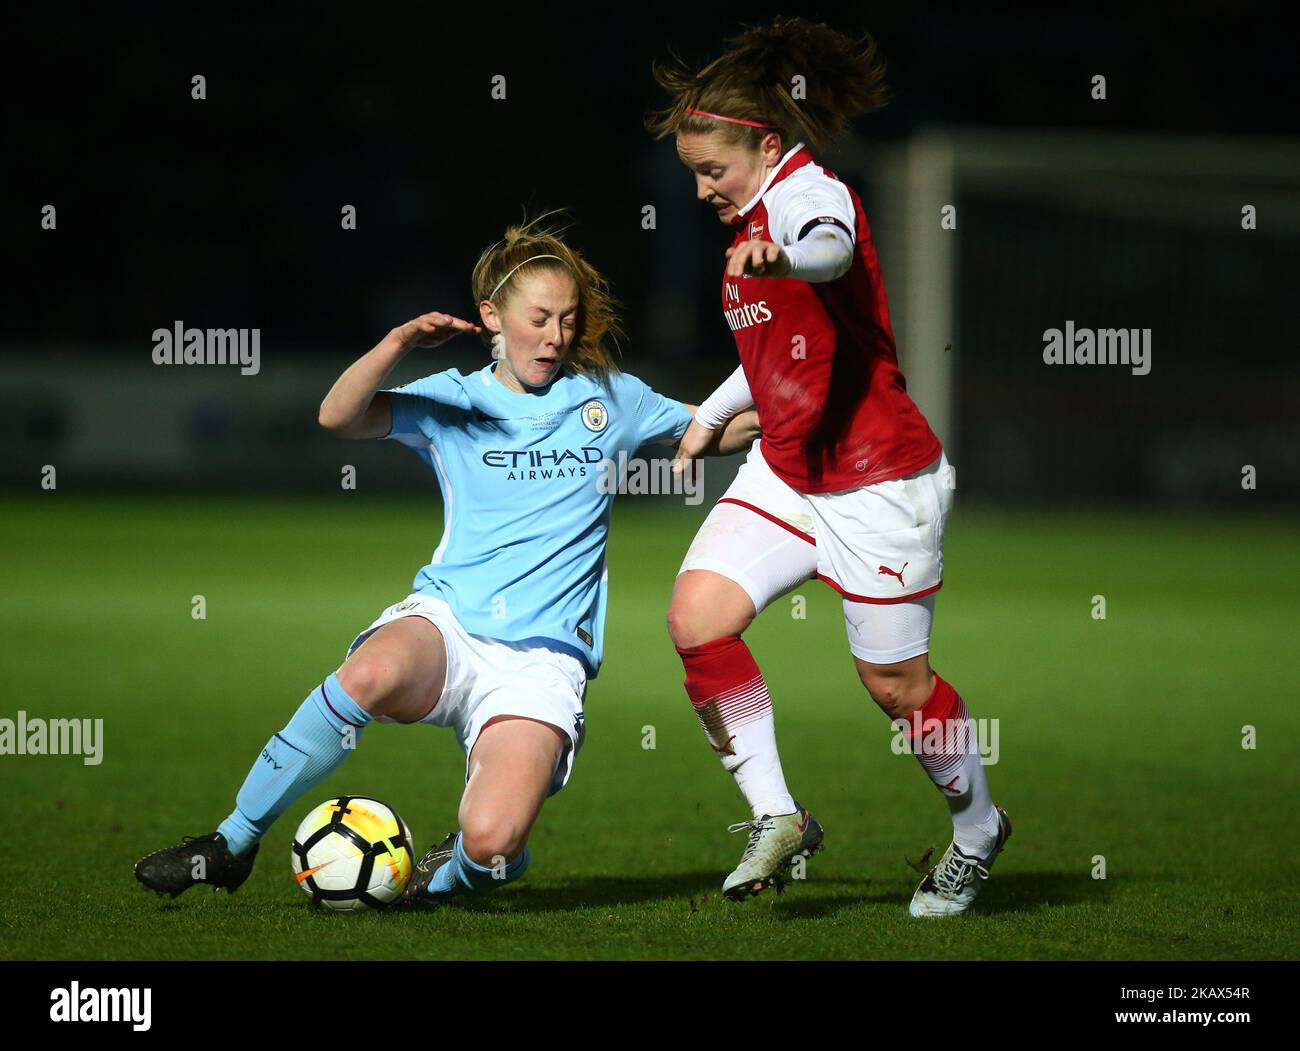 Kim Little of Arsenal tussle with Keira Walsh of Manchester City WFC during The FA WSL Continental Tyres Cup Final match between Arsenal against Manchester City Women at Adams Park stadium, Wycombe England on 14 March 2018 (Photo by Kieran Galvin/NurPhoto)  Stock Photo